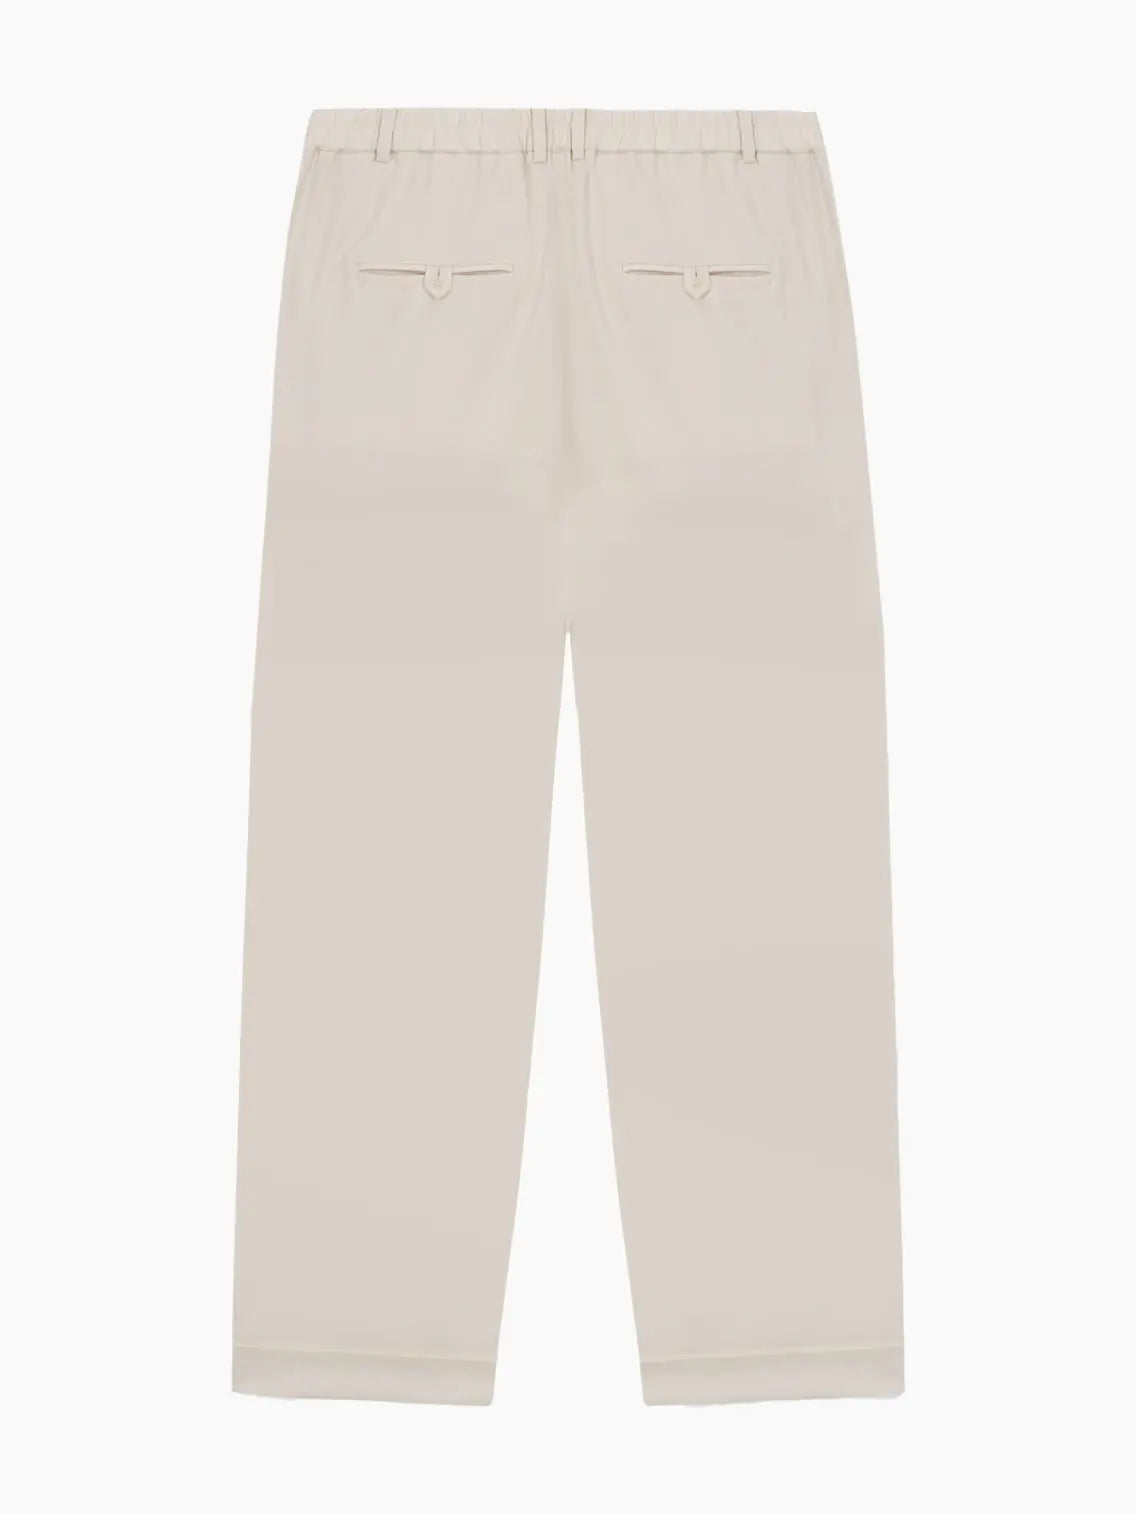 A pair of beige, high-waisted Tailoring Pants Ivory with pleats running down the front. The pants feature side pockets, belt loops, and a button closure at the waistband. With a relaxed, slightly tapered fit, these stylish trousers from Cordera are a wardrobe essential.